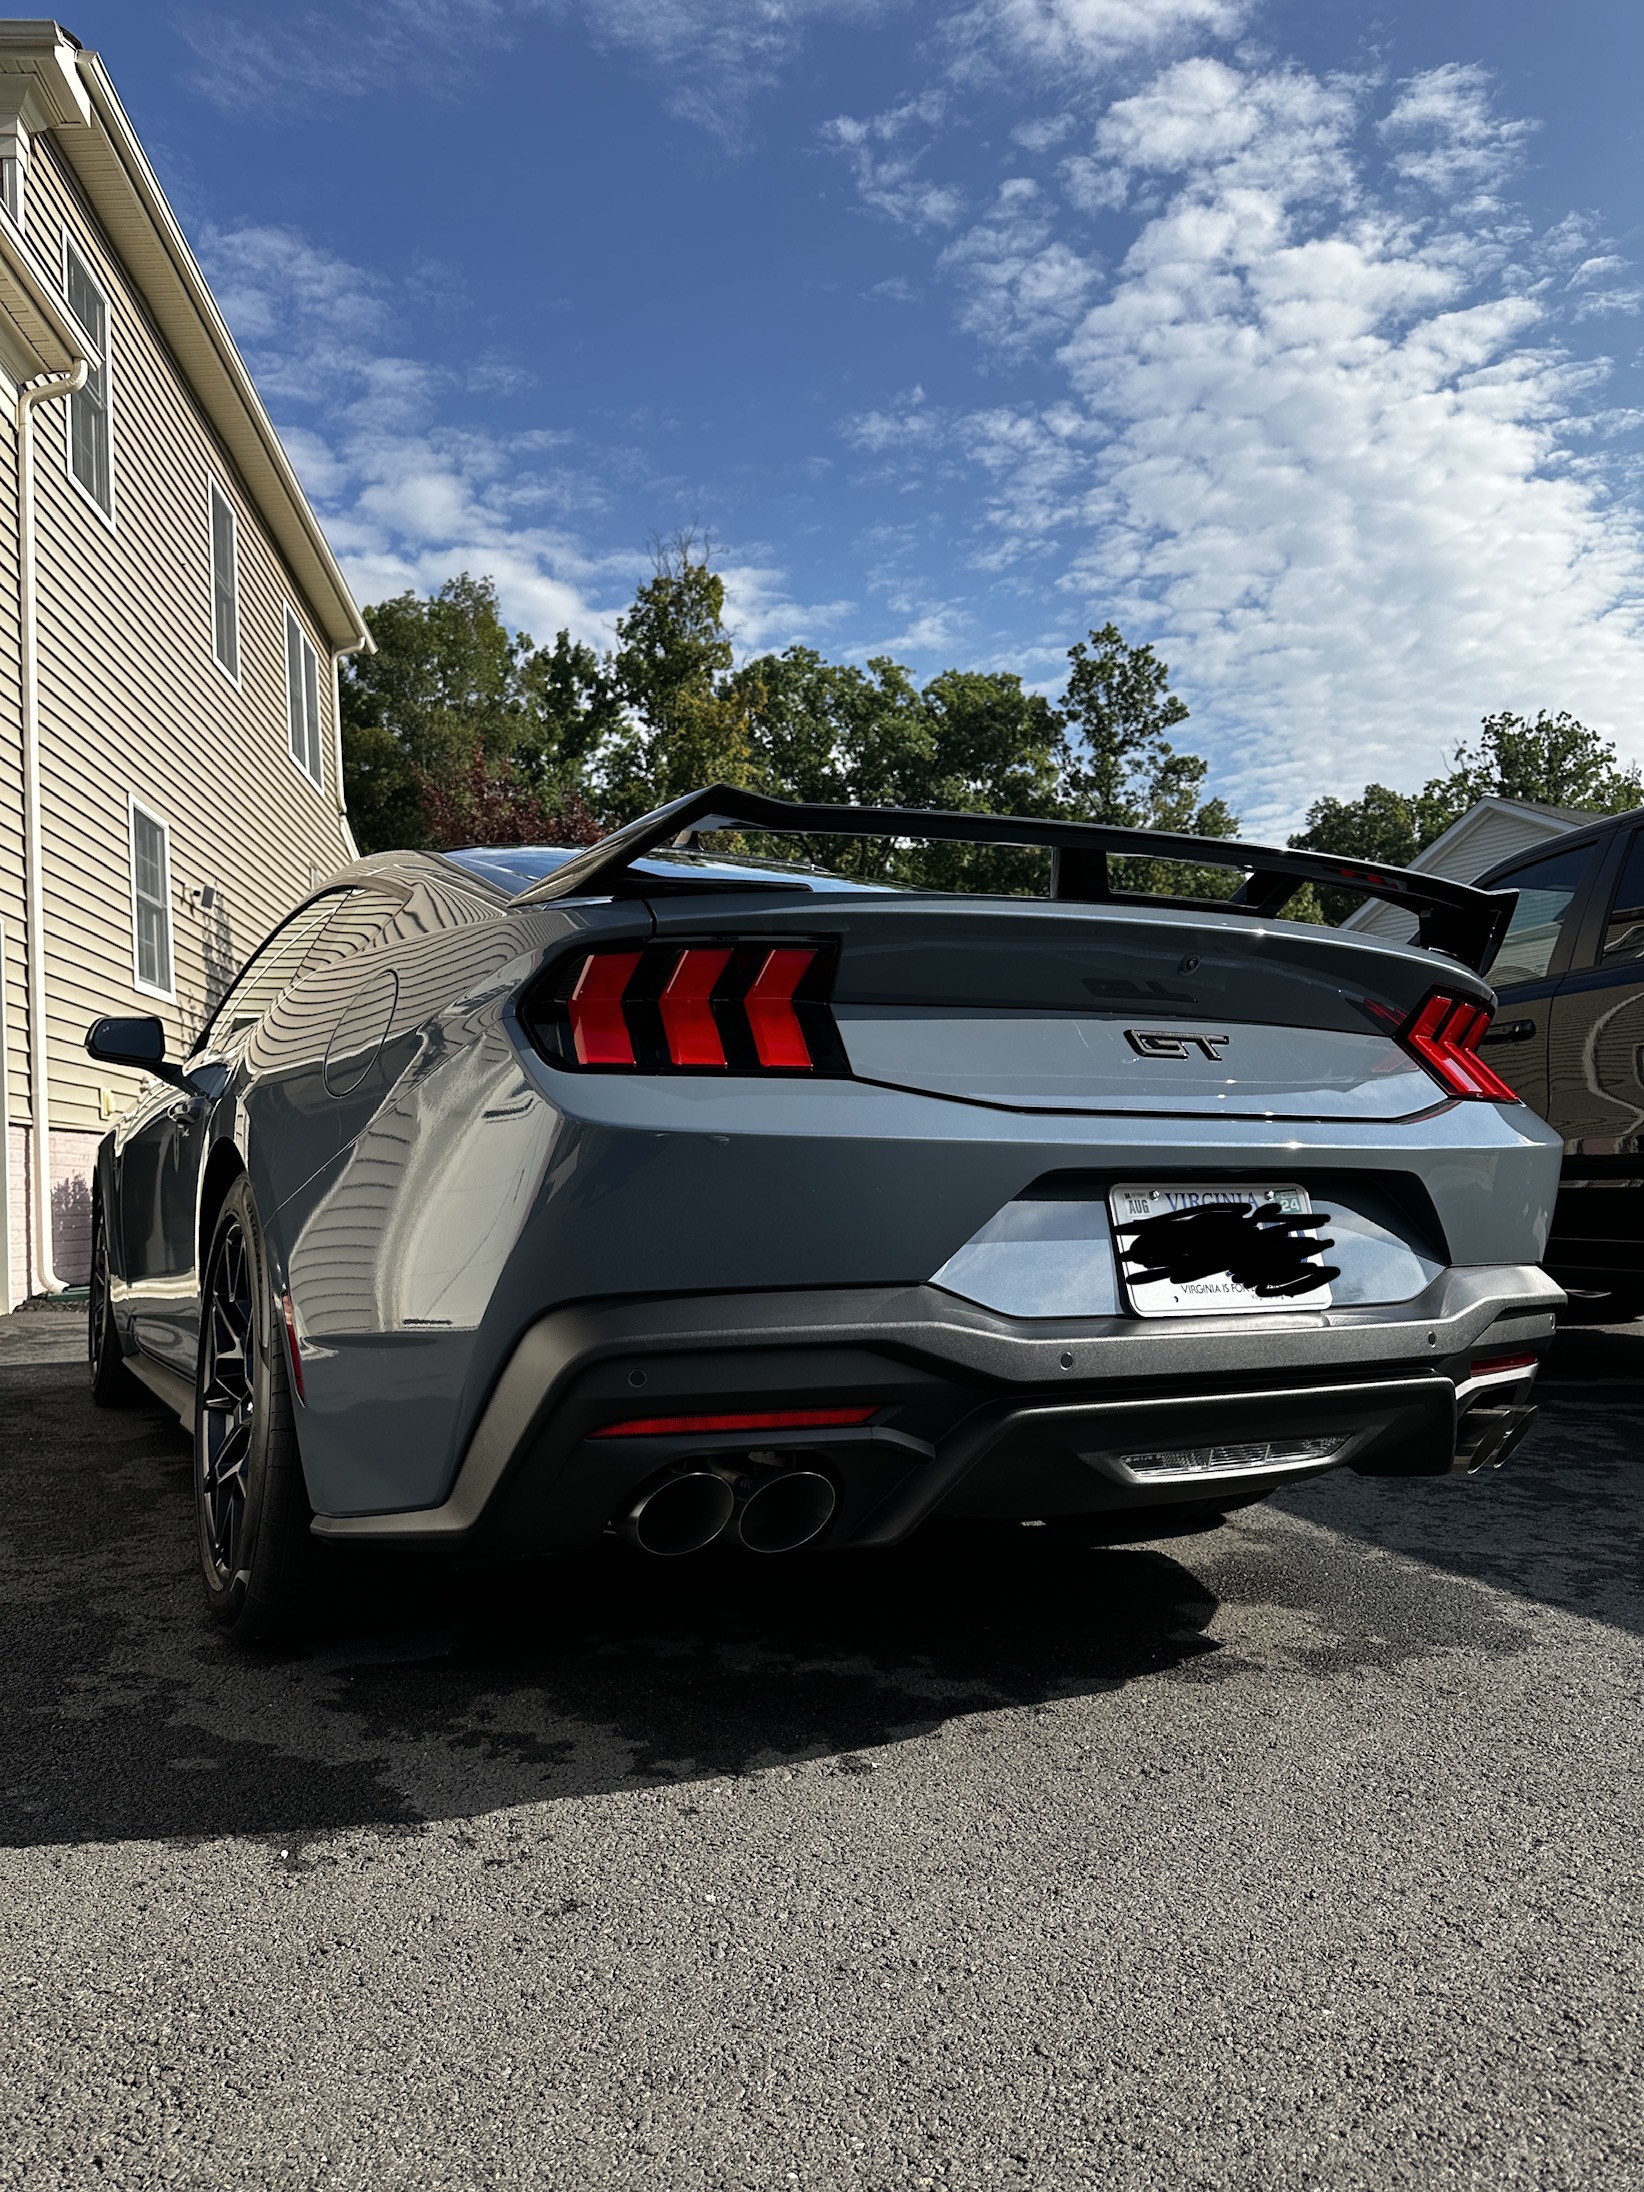 S650 Mustang BUILT & SHIPPED !! Tracker update 2023: What's your status? IMG_1919